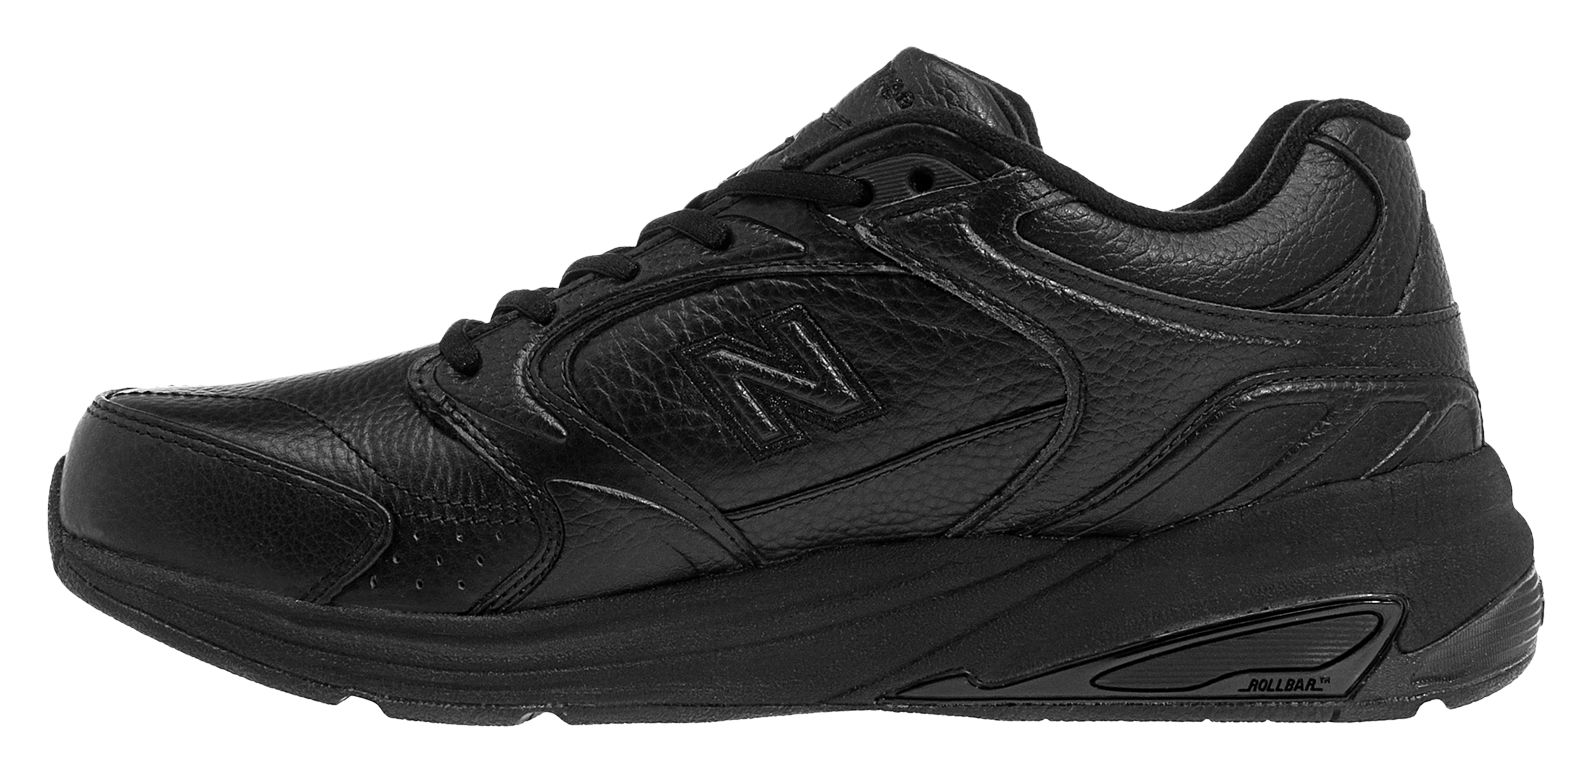 Off on MW927BK at Joe's New Balance Outlet